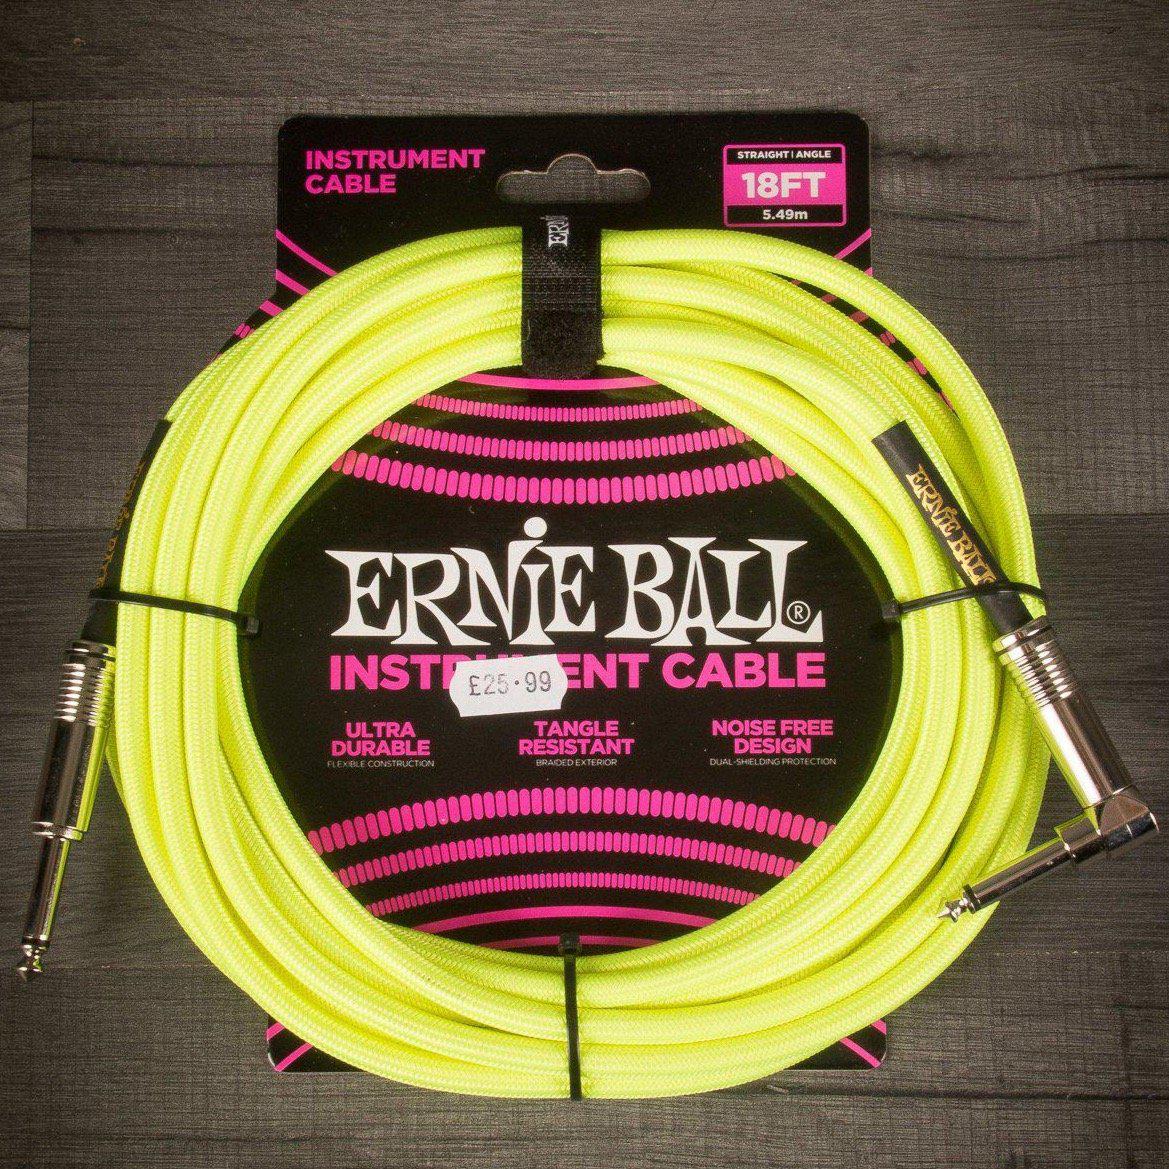 Ernie Ball Accessories Ernie Ball Angled Guitar Cable Neon Yellow - 18 Ft